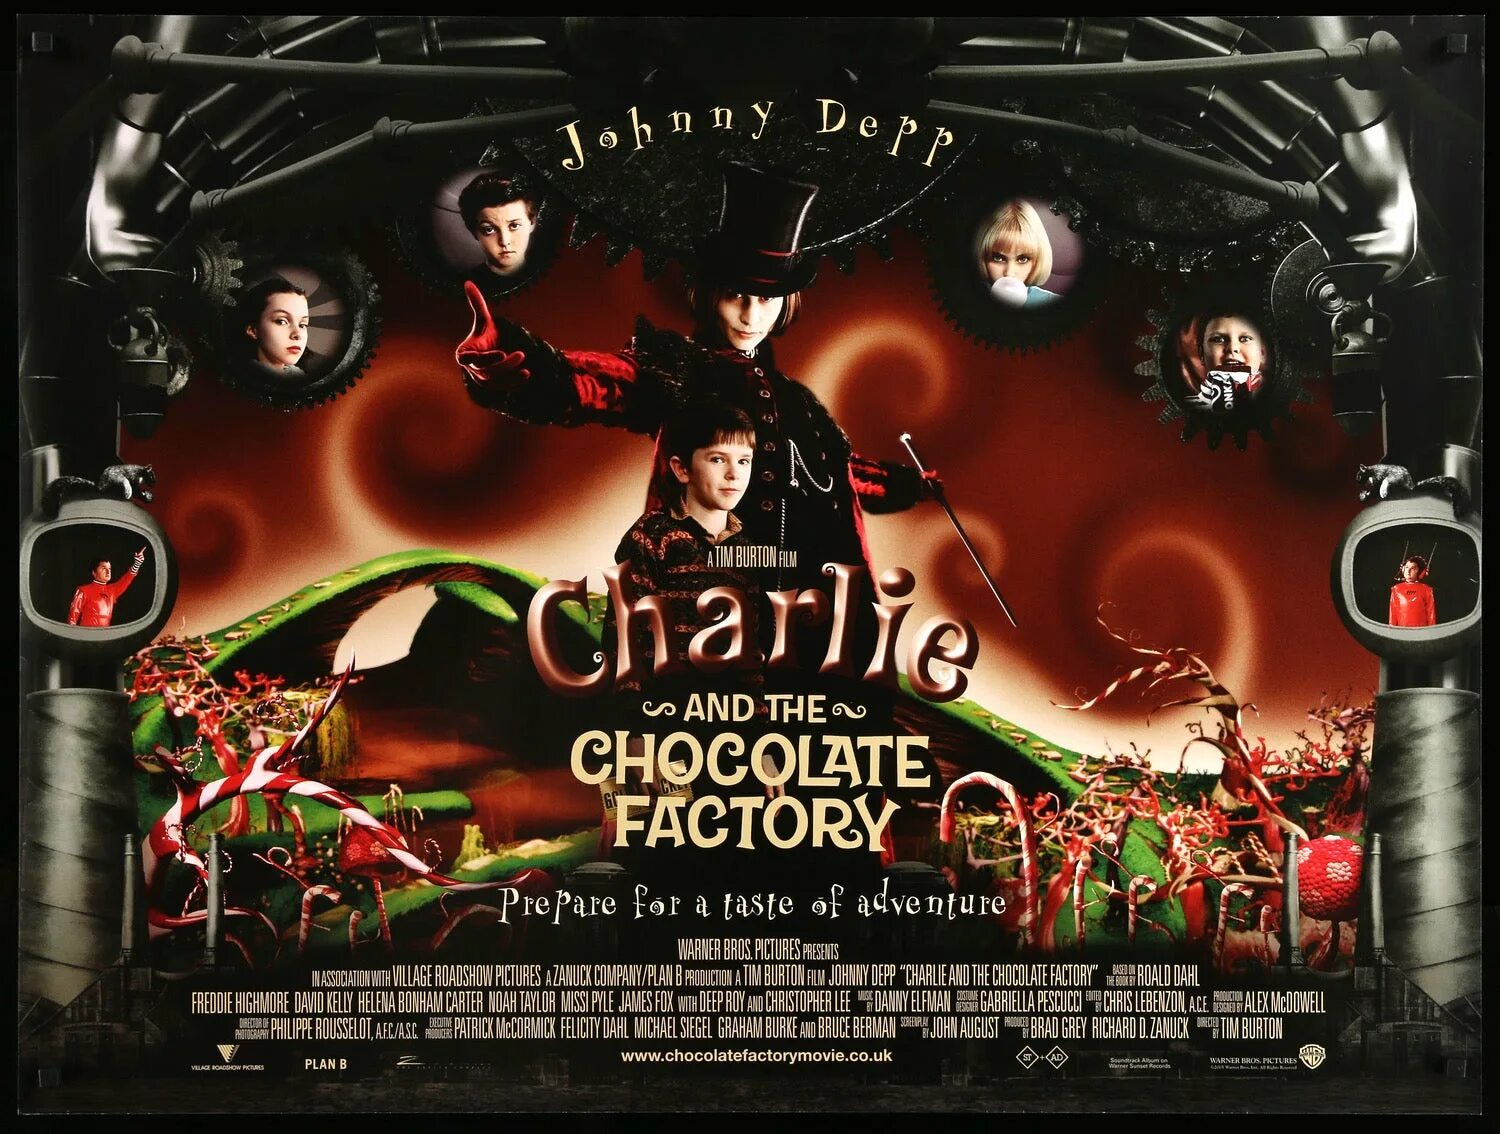 Charlie and the Chocolate Factory 2005 poster. Charlie and the Chocolate Factory Постер. Charlie and the Chocolate Factory 2005 обложка. Чарли и шоколадная фабрика афиша. Шоколадная фабрика аудиокнига слушать